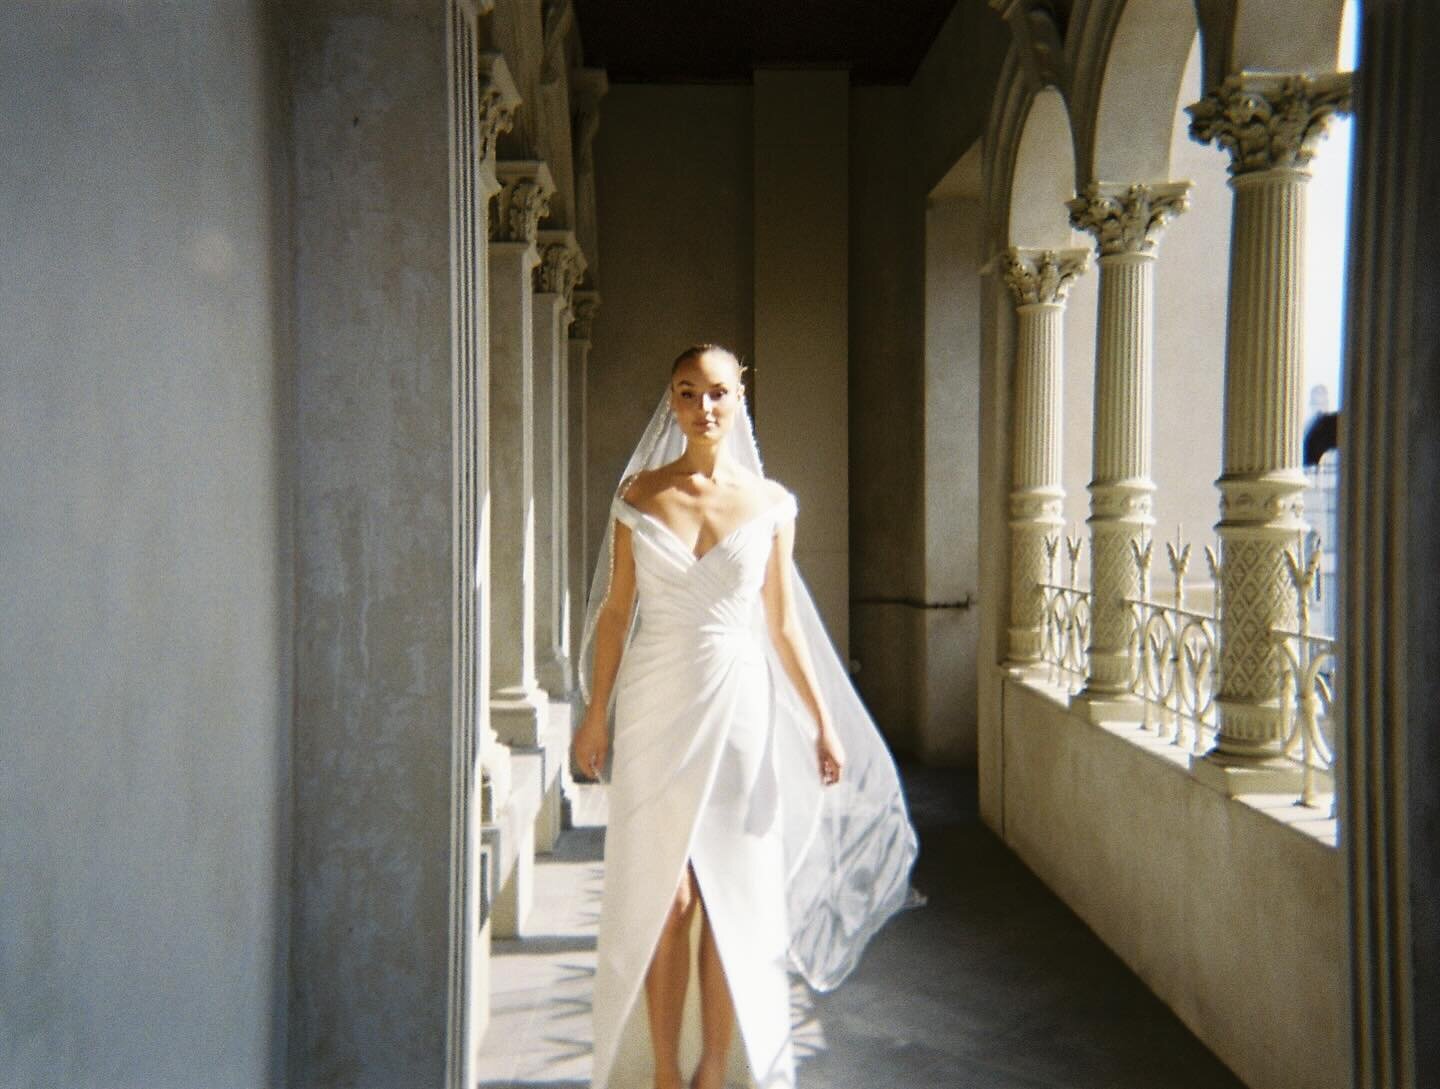 The all time classic, Helena. A film favourite captured beautifully from our resort 24 shoot at @sophia.prahranarcade